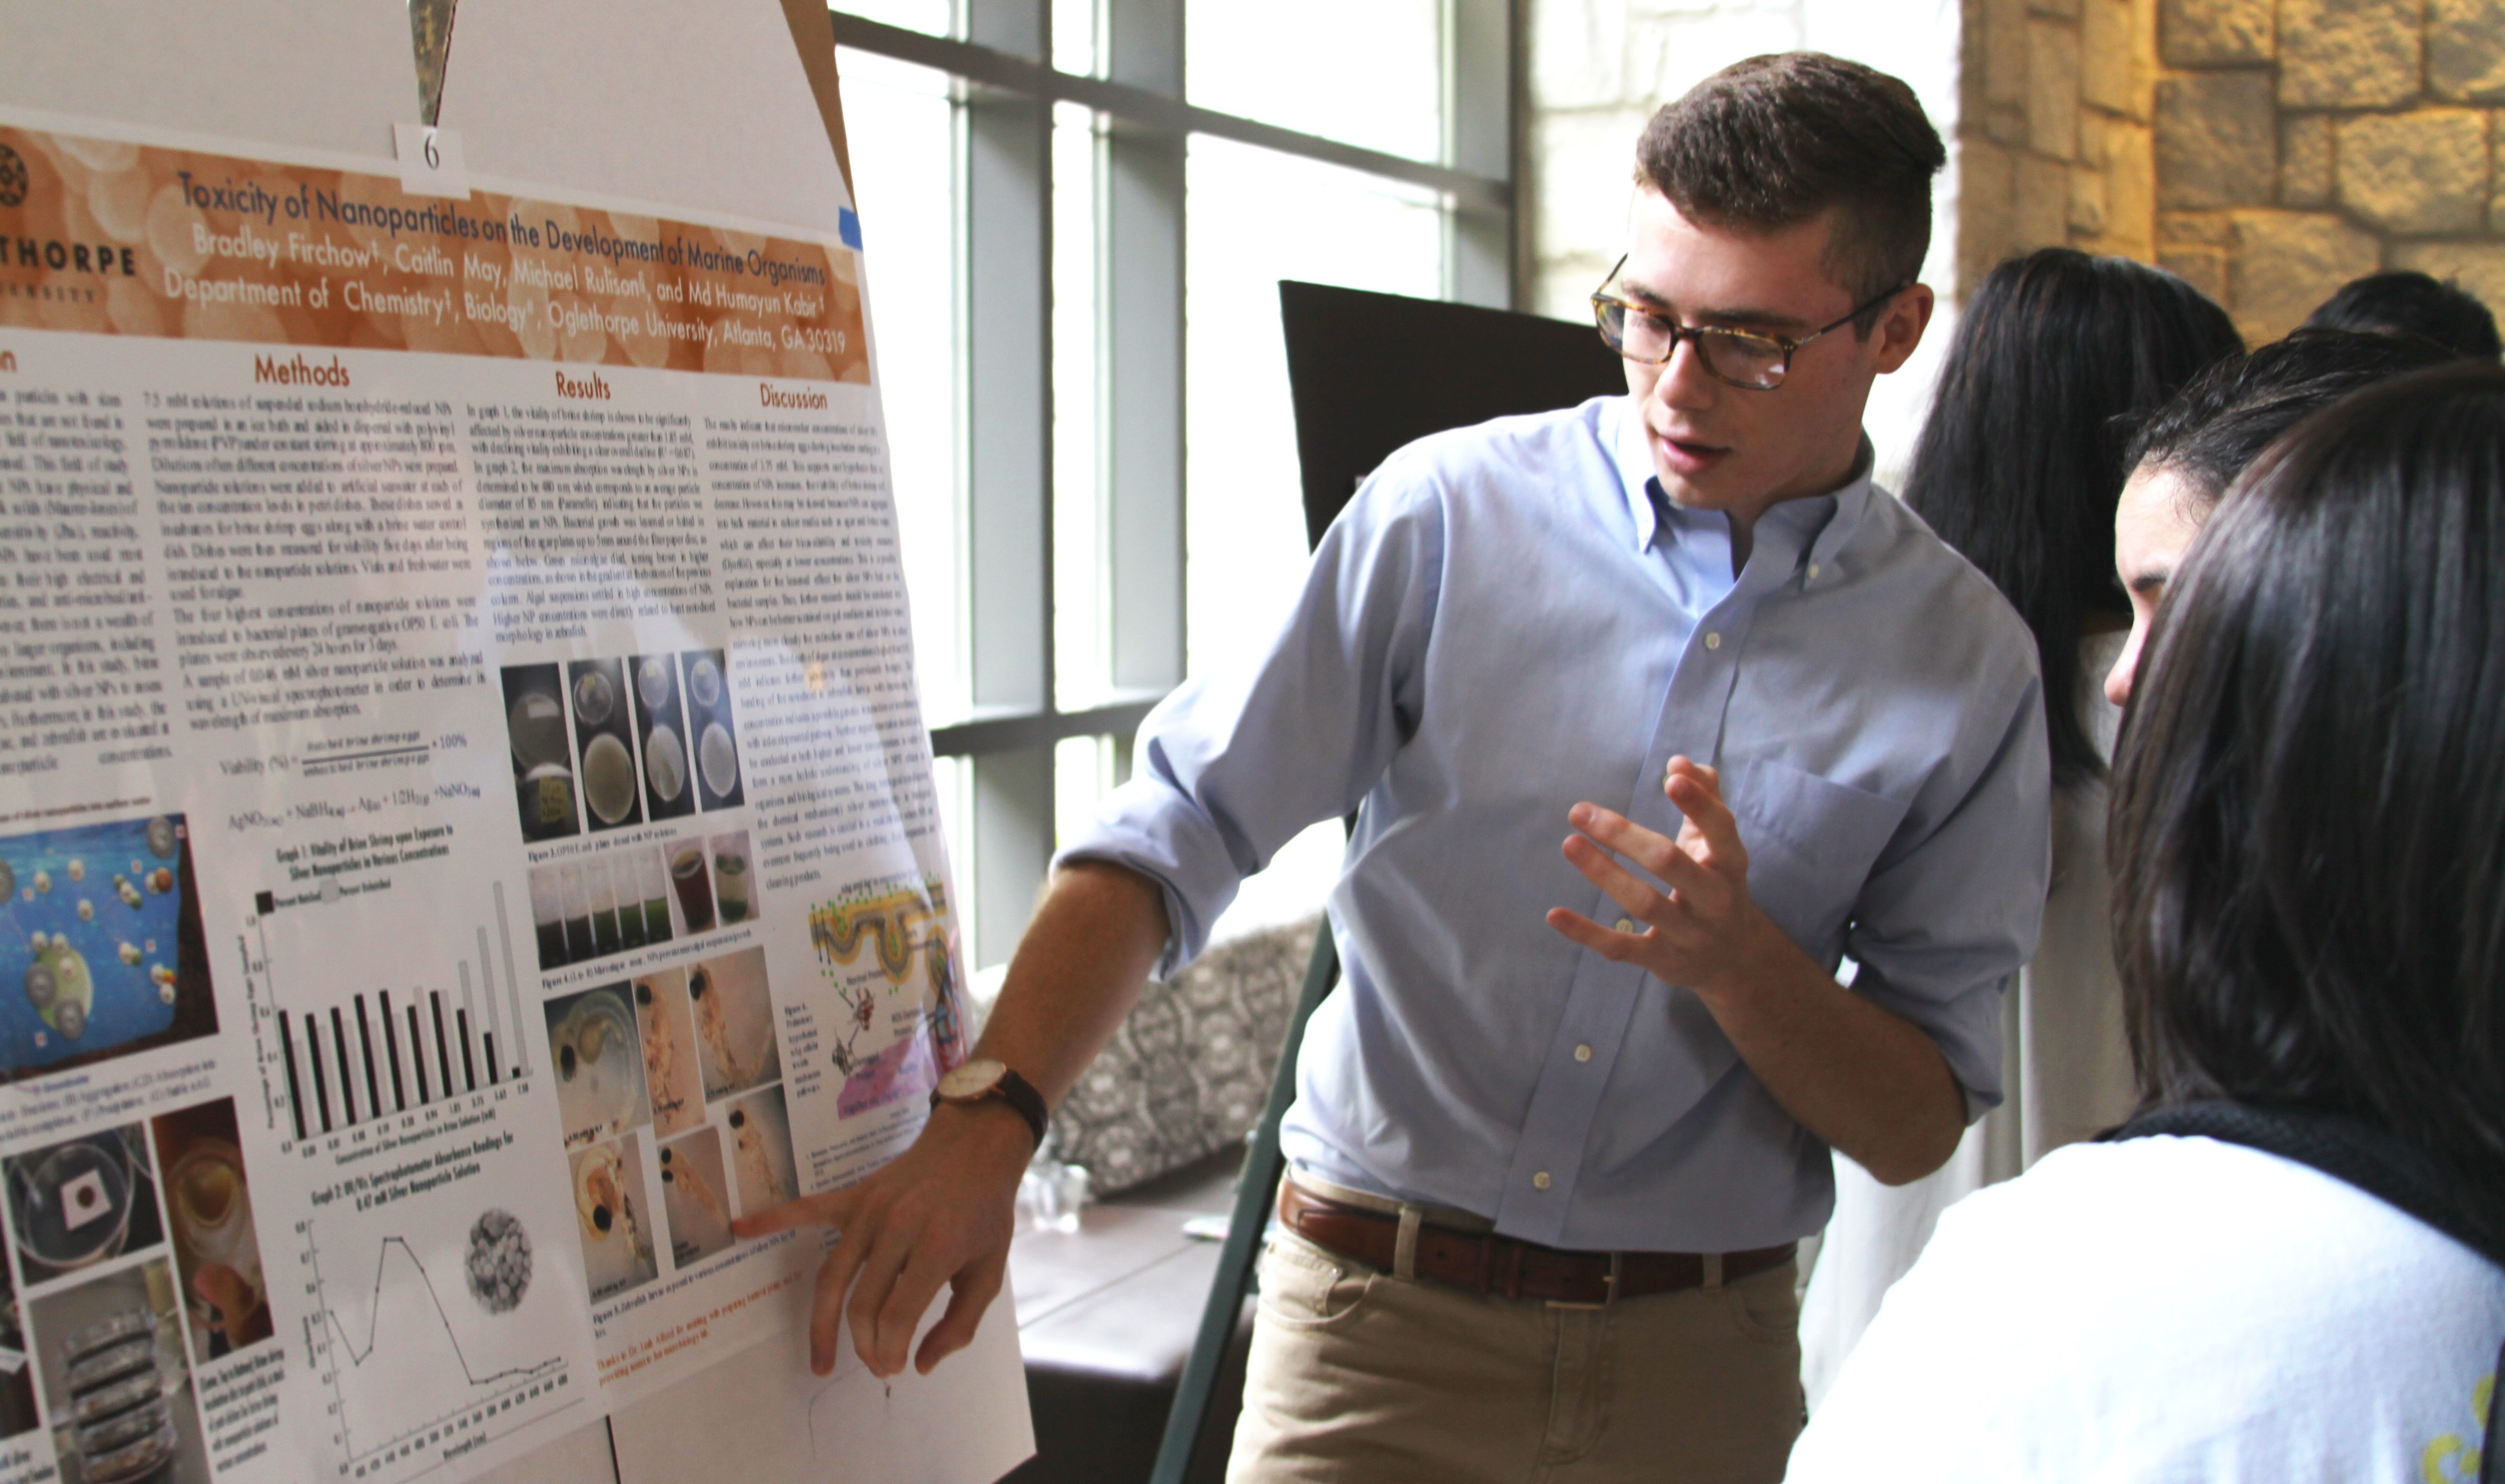 Brad Firchow '19 presents his research at the 2016 Liberal Arts & Sciences Symposium